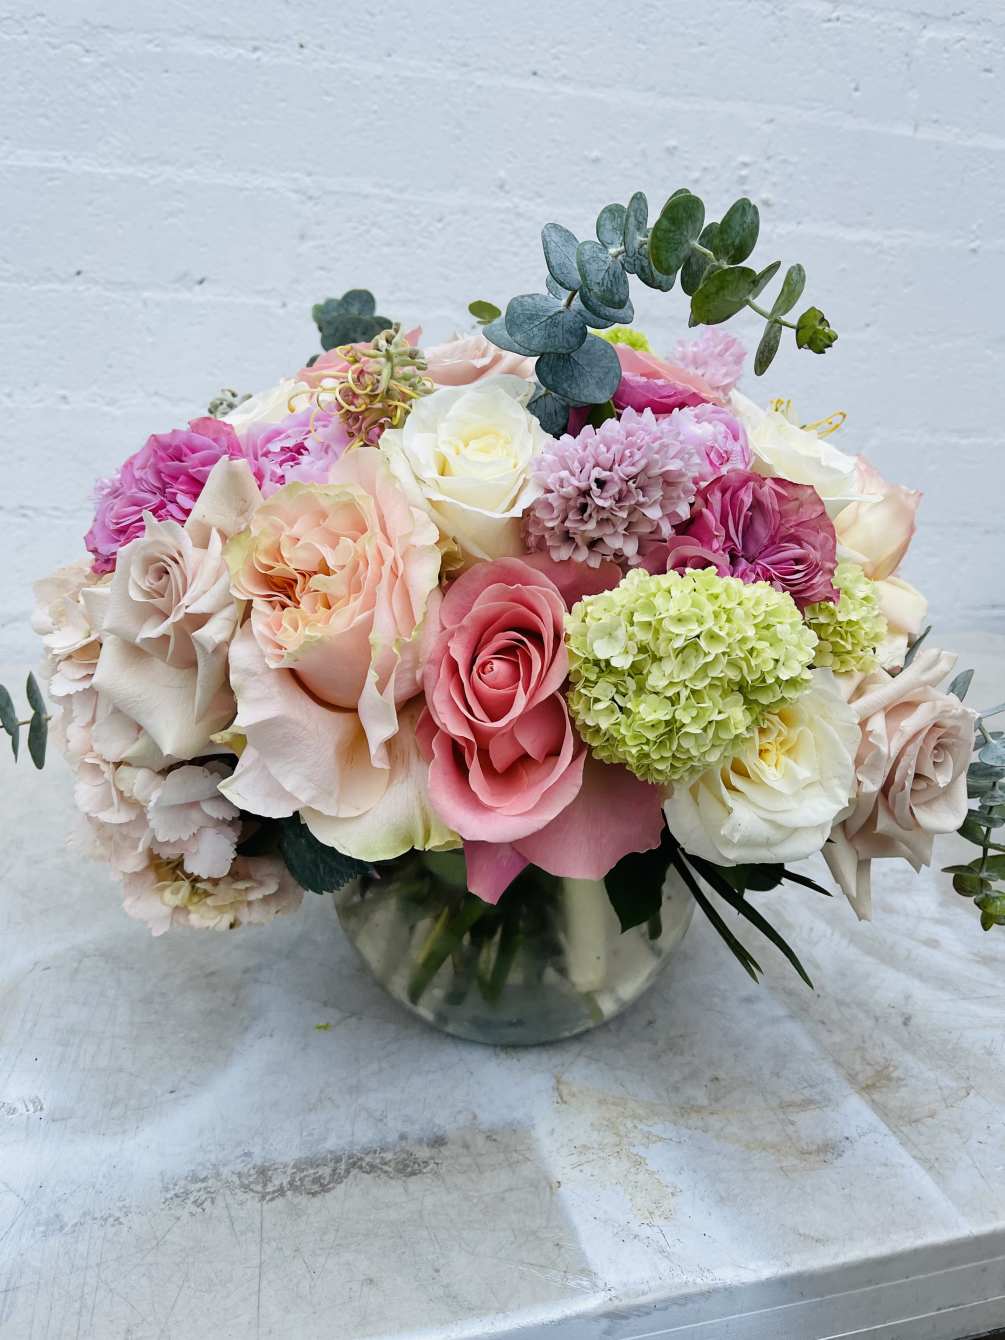 This is an absolutely beautiful fishbowl with hyacinth, garden large roses, light